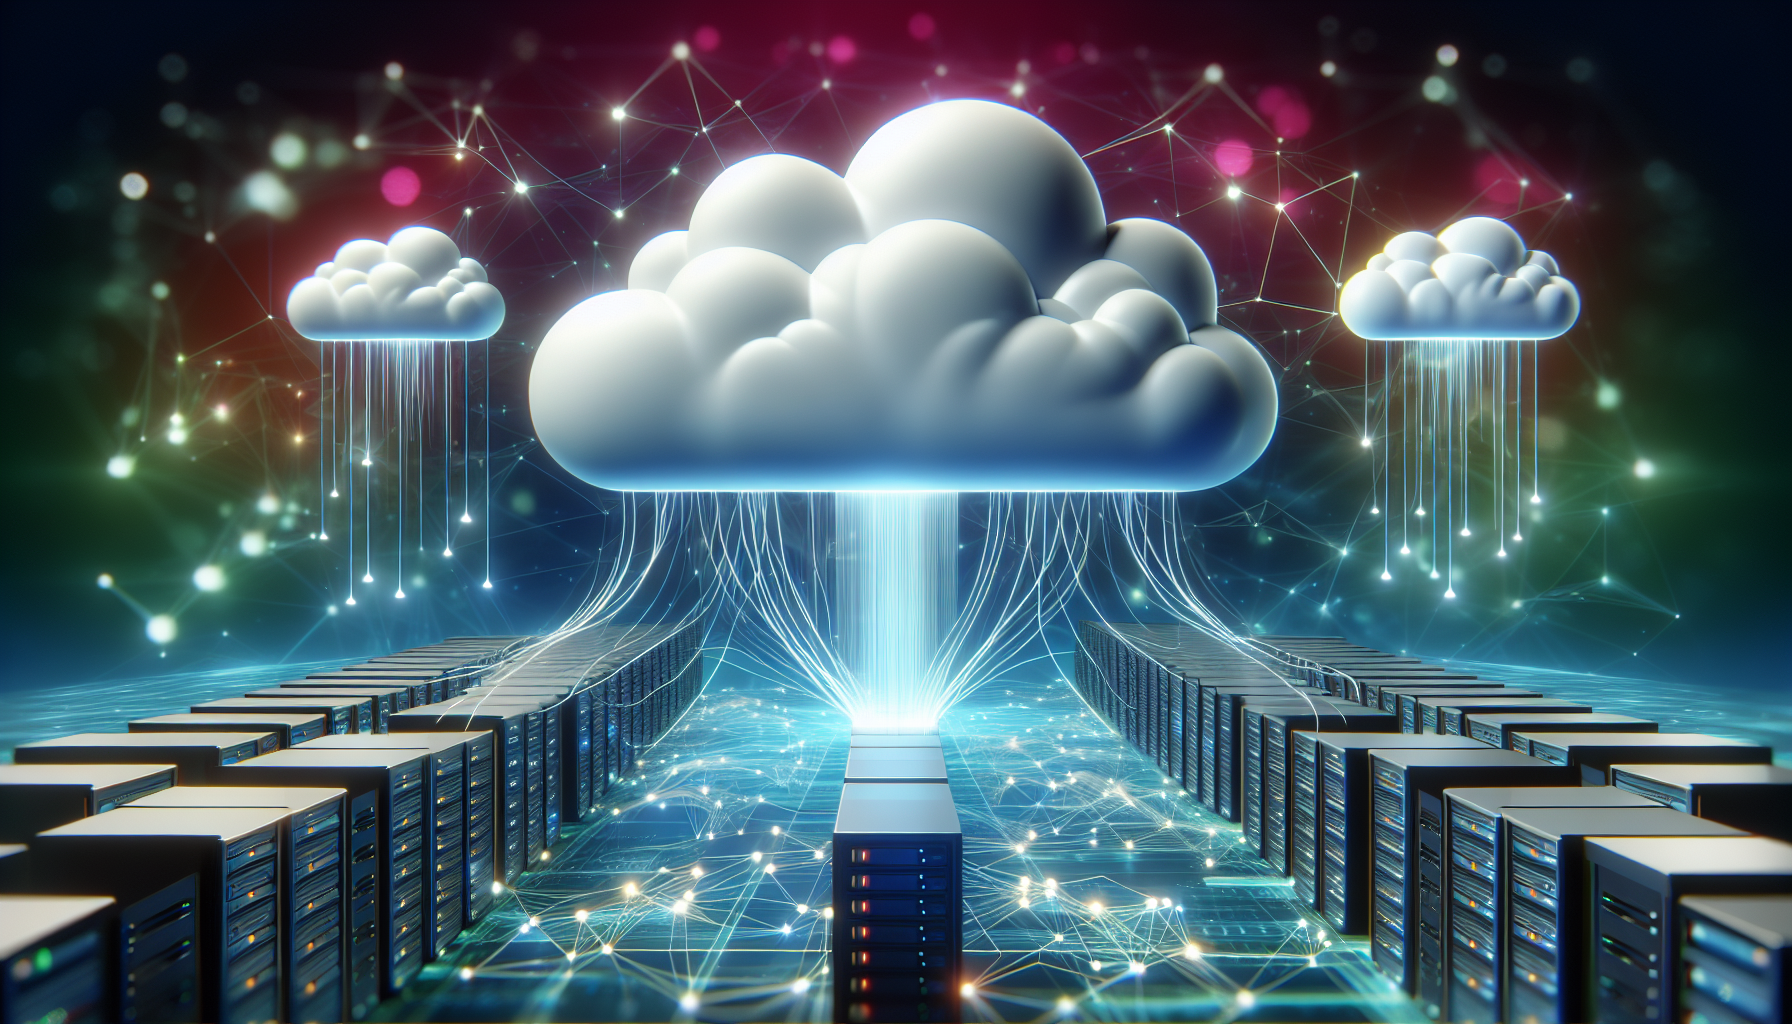 Illustration of cloud computing services and infrastructure